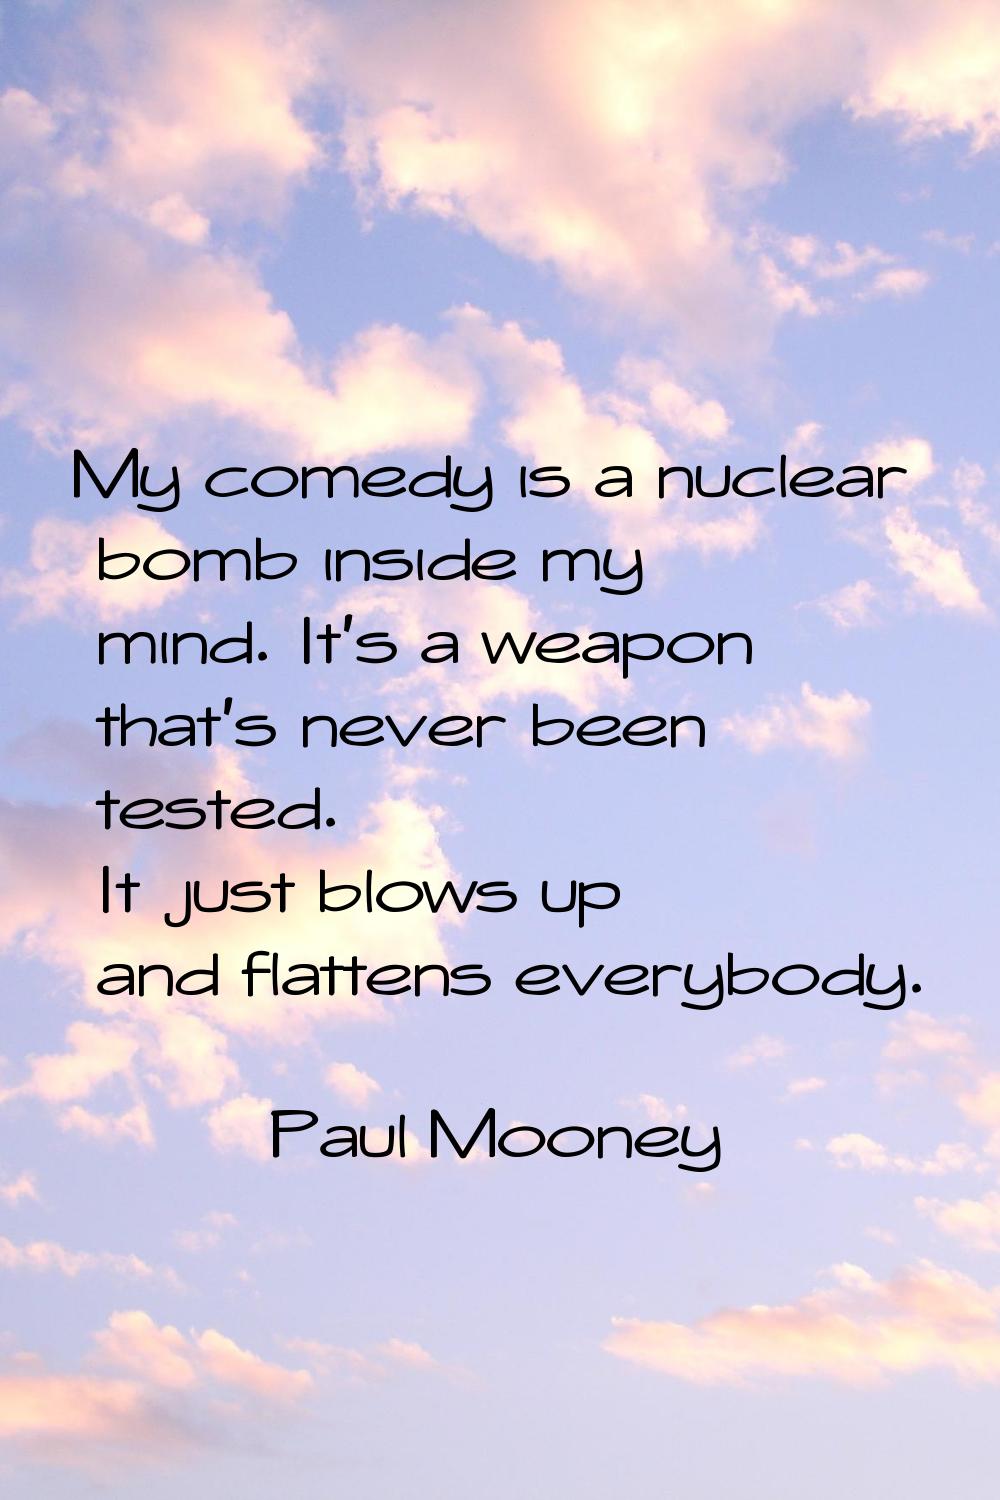 My comedy is a nuclear bomb inside my mind. It's a weapon that's never been tested. It just blows u